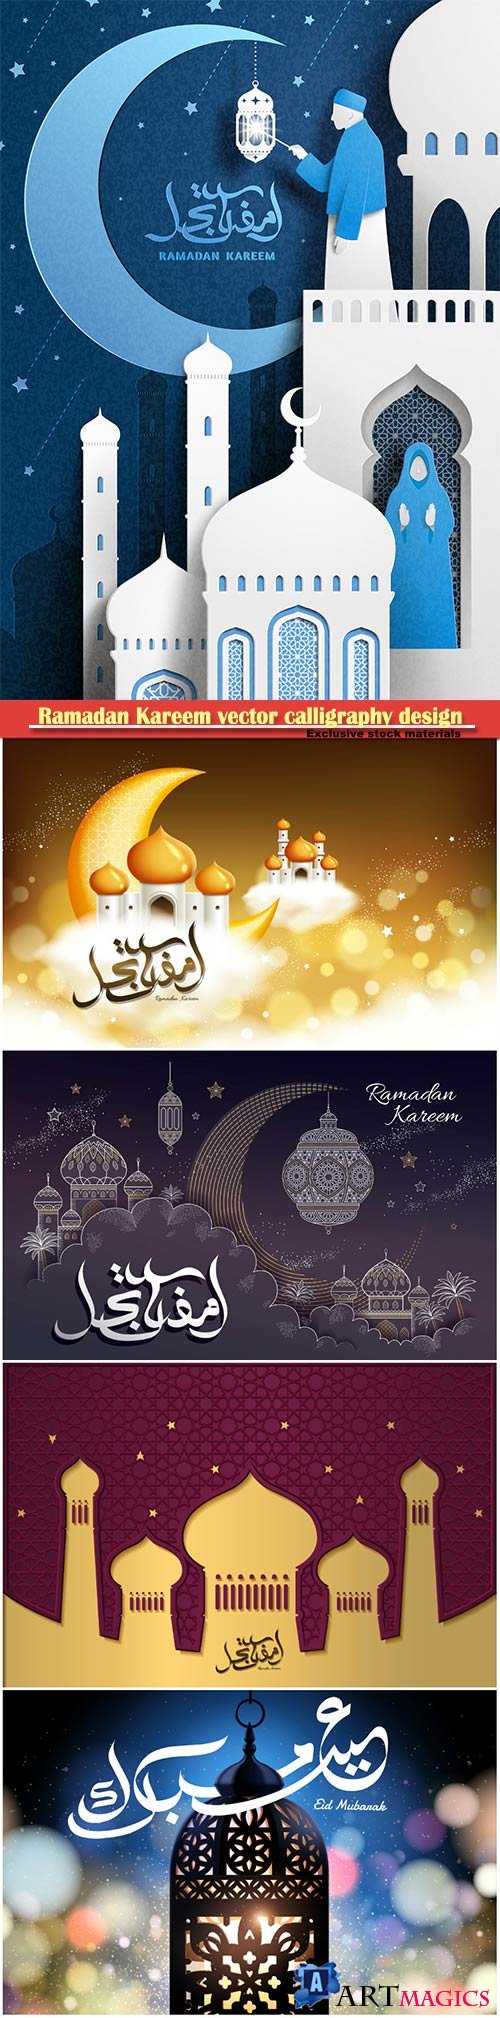 Ramadan Kareem vector calligraphy design with decorative floral pattern,mosque silhouette, crescent and glittering islamic background # 9